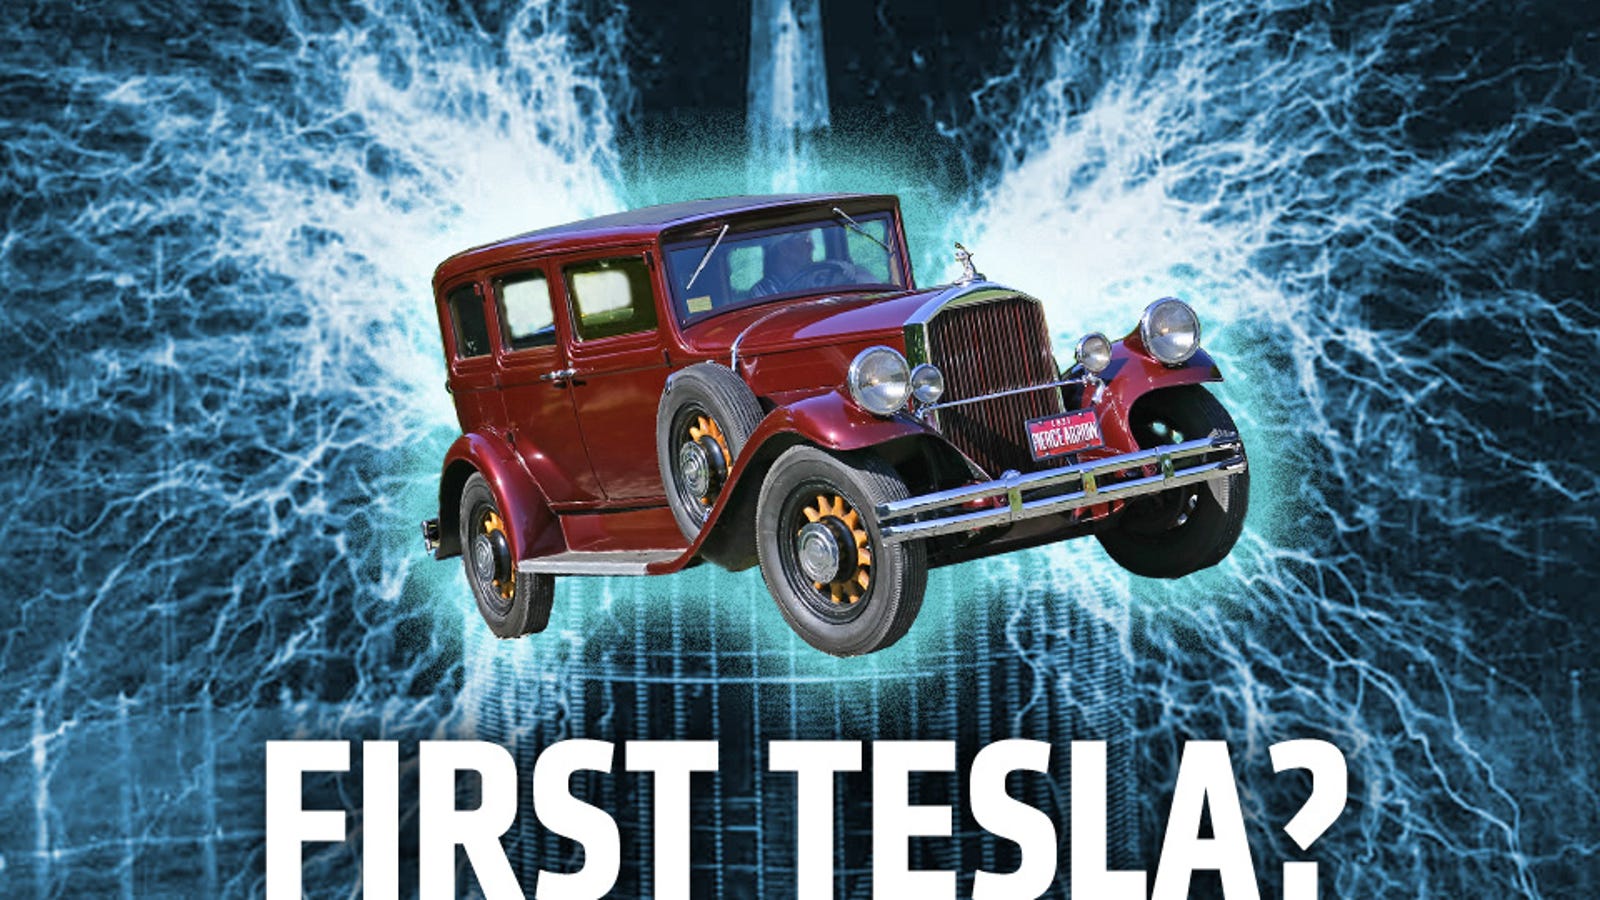 Nikola Tesla's Mysterious Electric Car Had No Batteries (And Probably